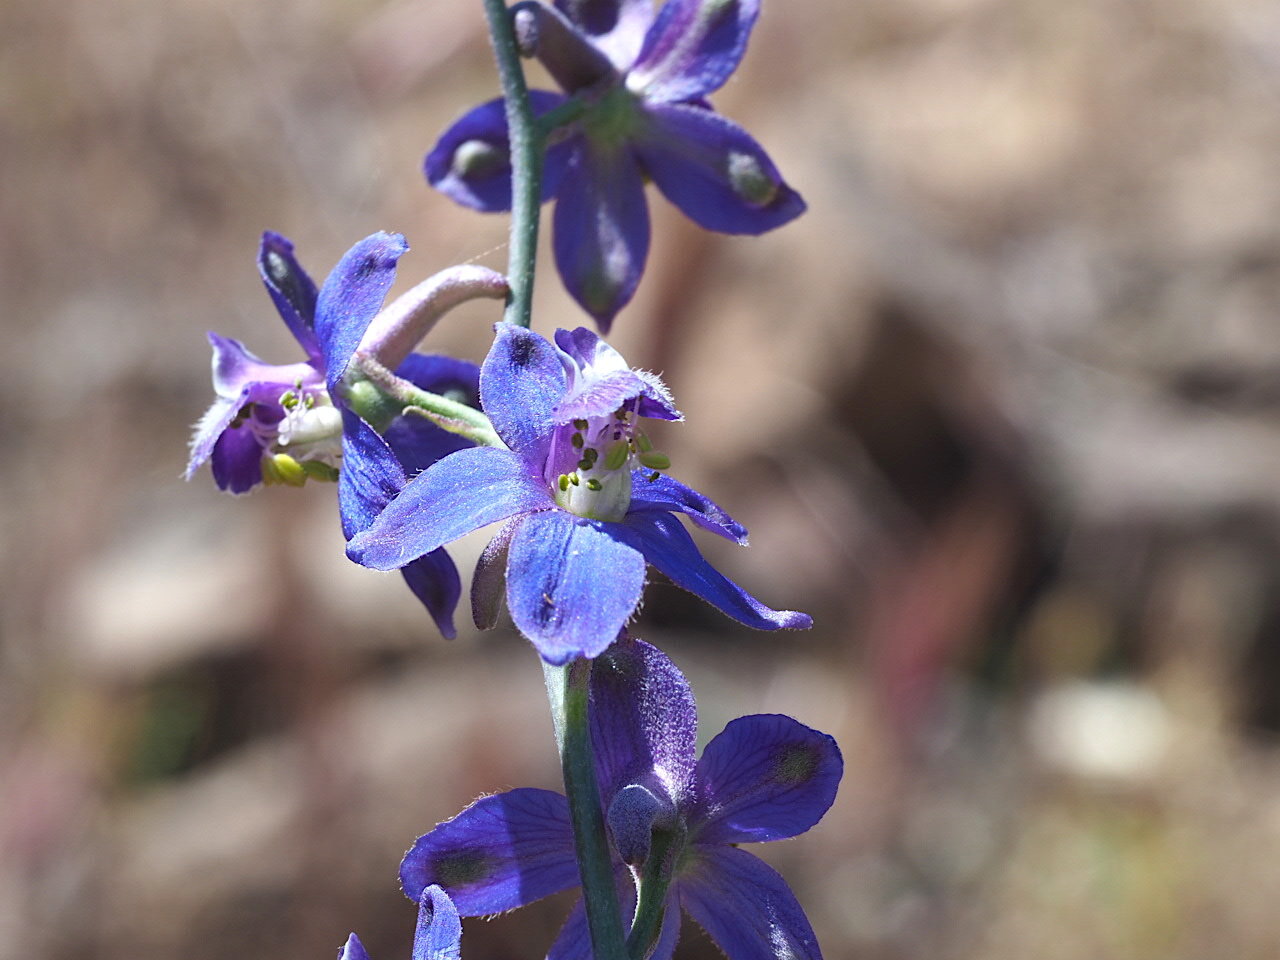 Delphinium parishii ssp. subglossum, with green anthers. What a treat this was!